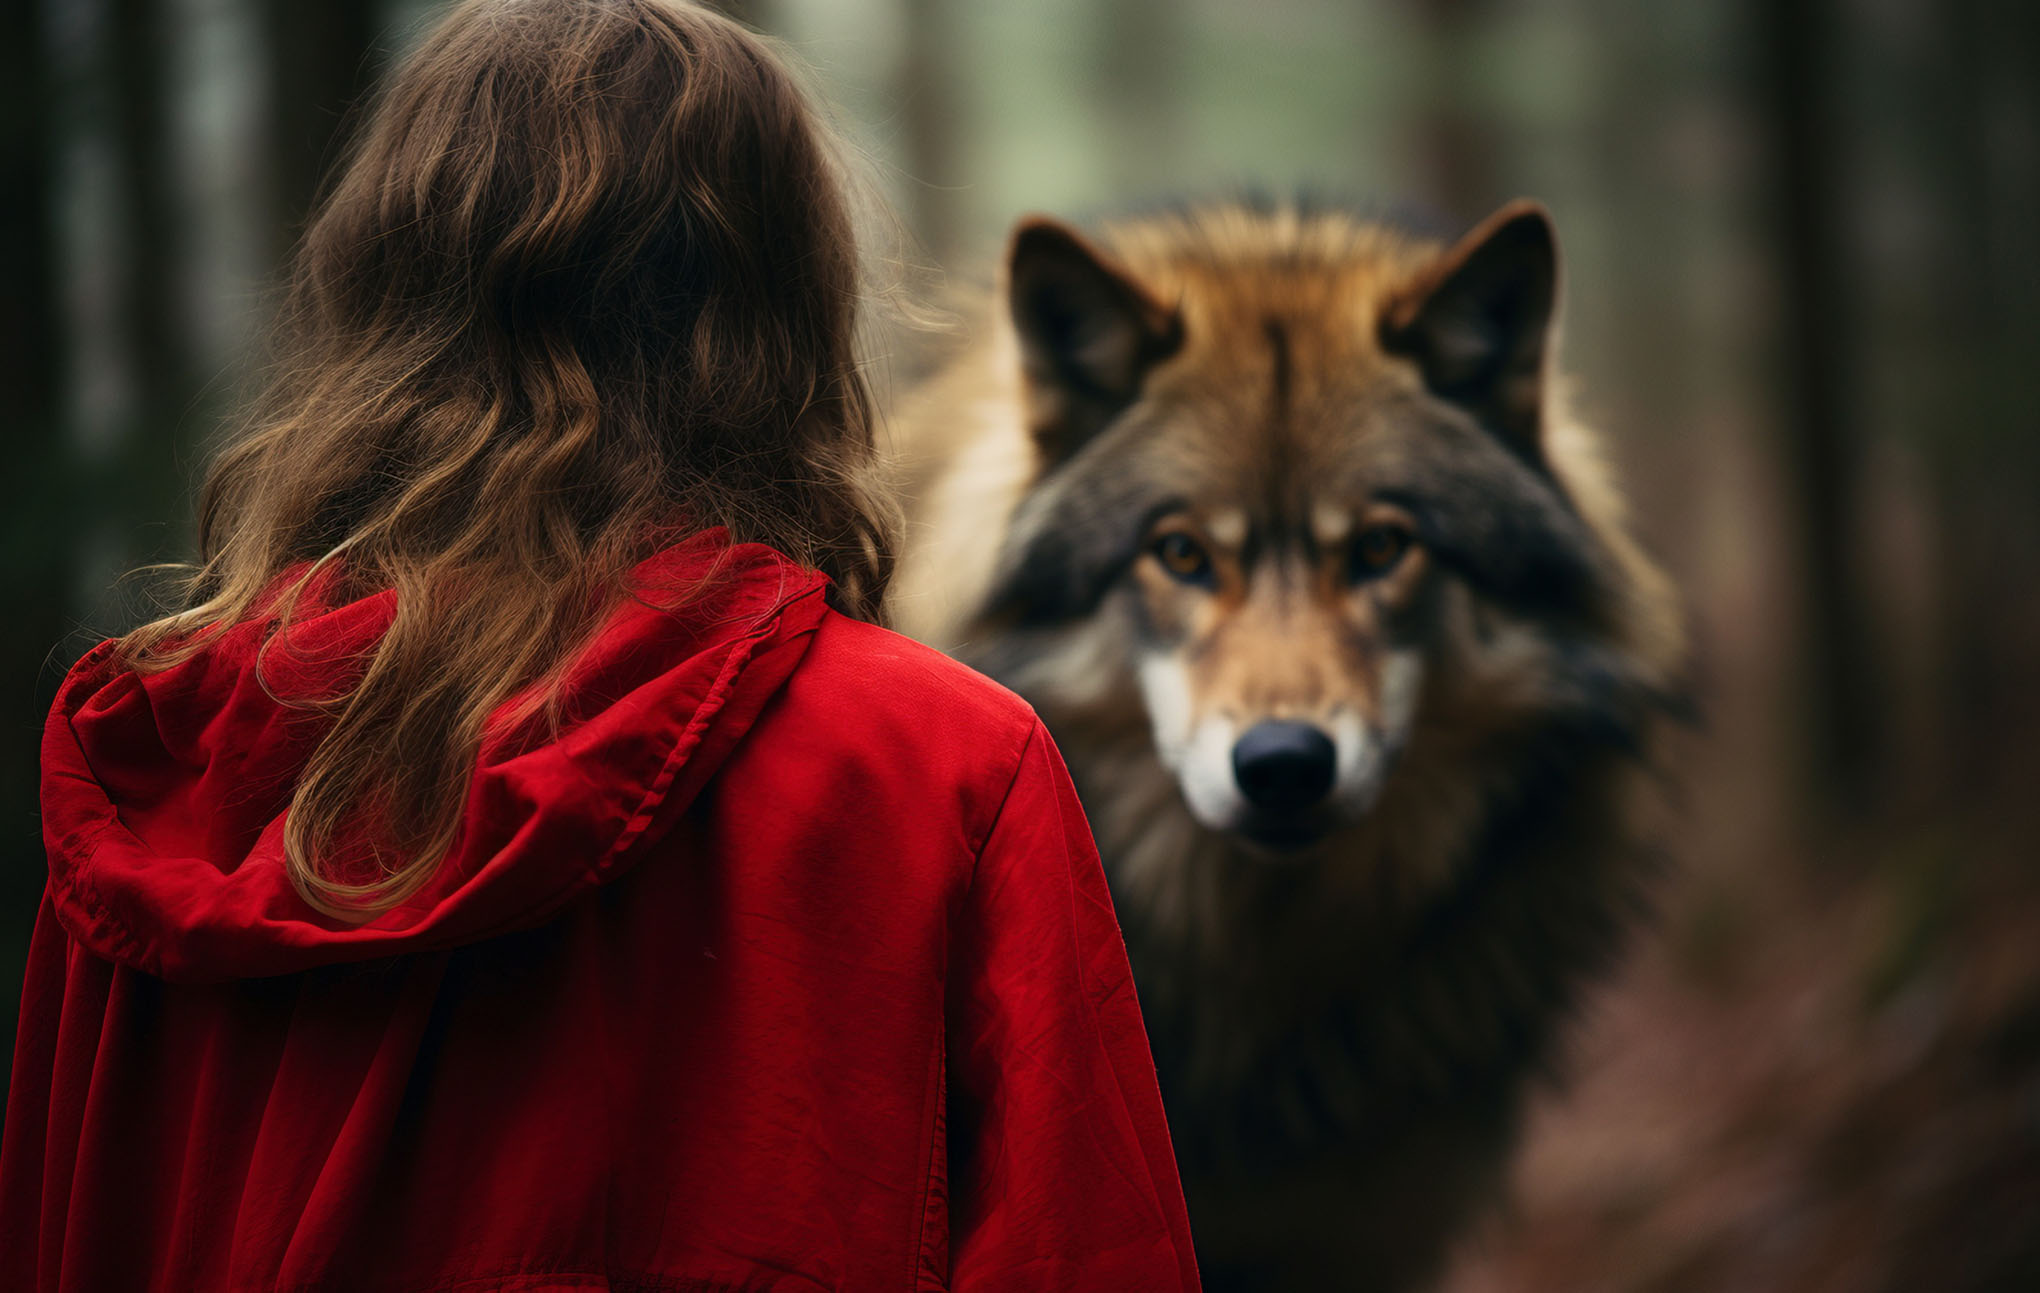 A young woman in a red hooded cloak stands in a forest, facing a large, attentive wolf with lush fur. the setting is misty, enhancing the mystical atmosphere of the encounter.